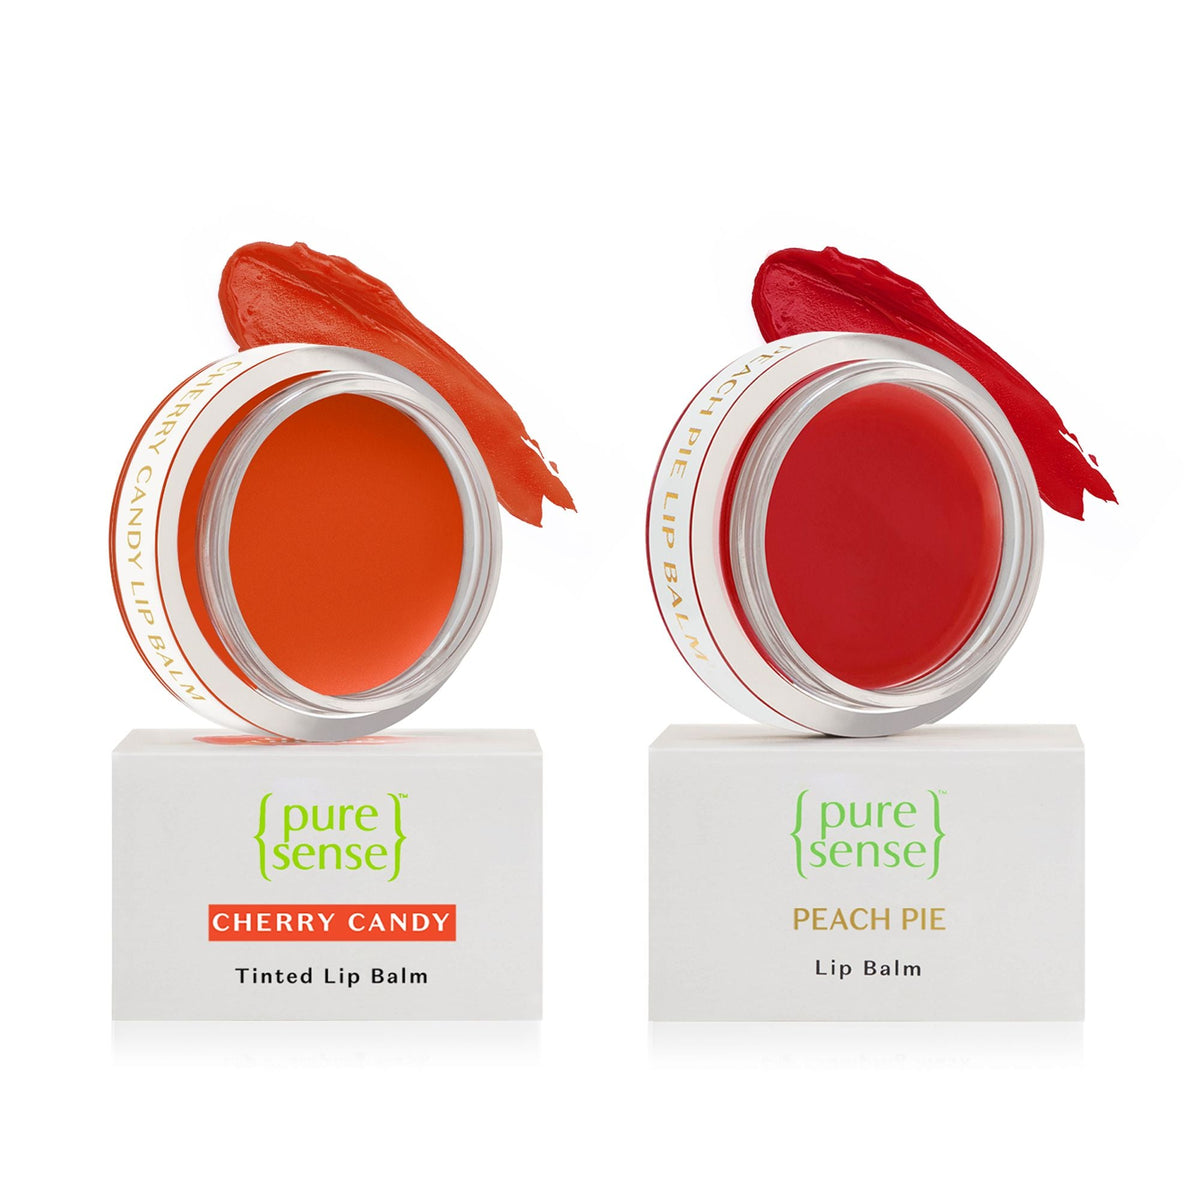 [CRED] Cherry Candy Tinted Lip Balm 5ml +  Peach Pie Lip Balm 5ml | Pack of 2 | From the makers of Parachute Advansed | 10ml